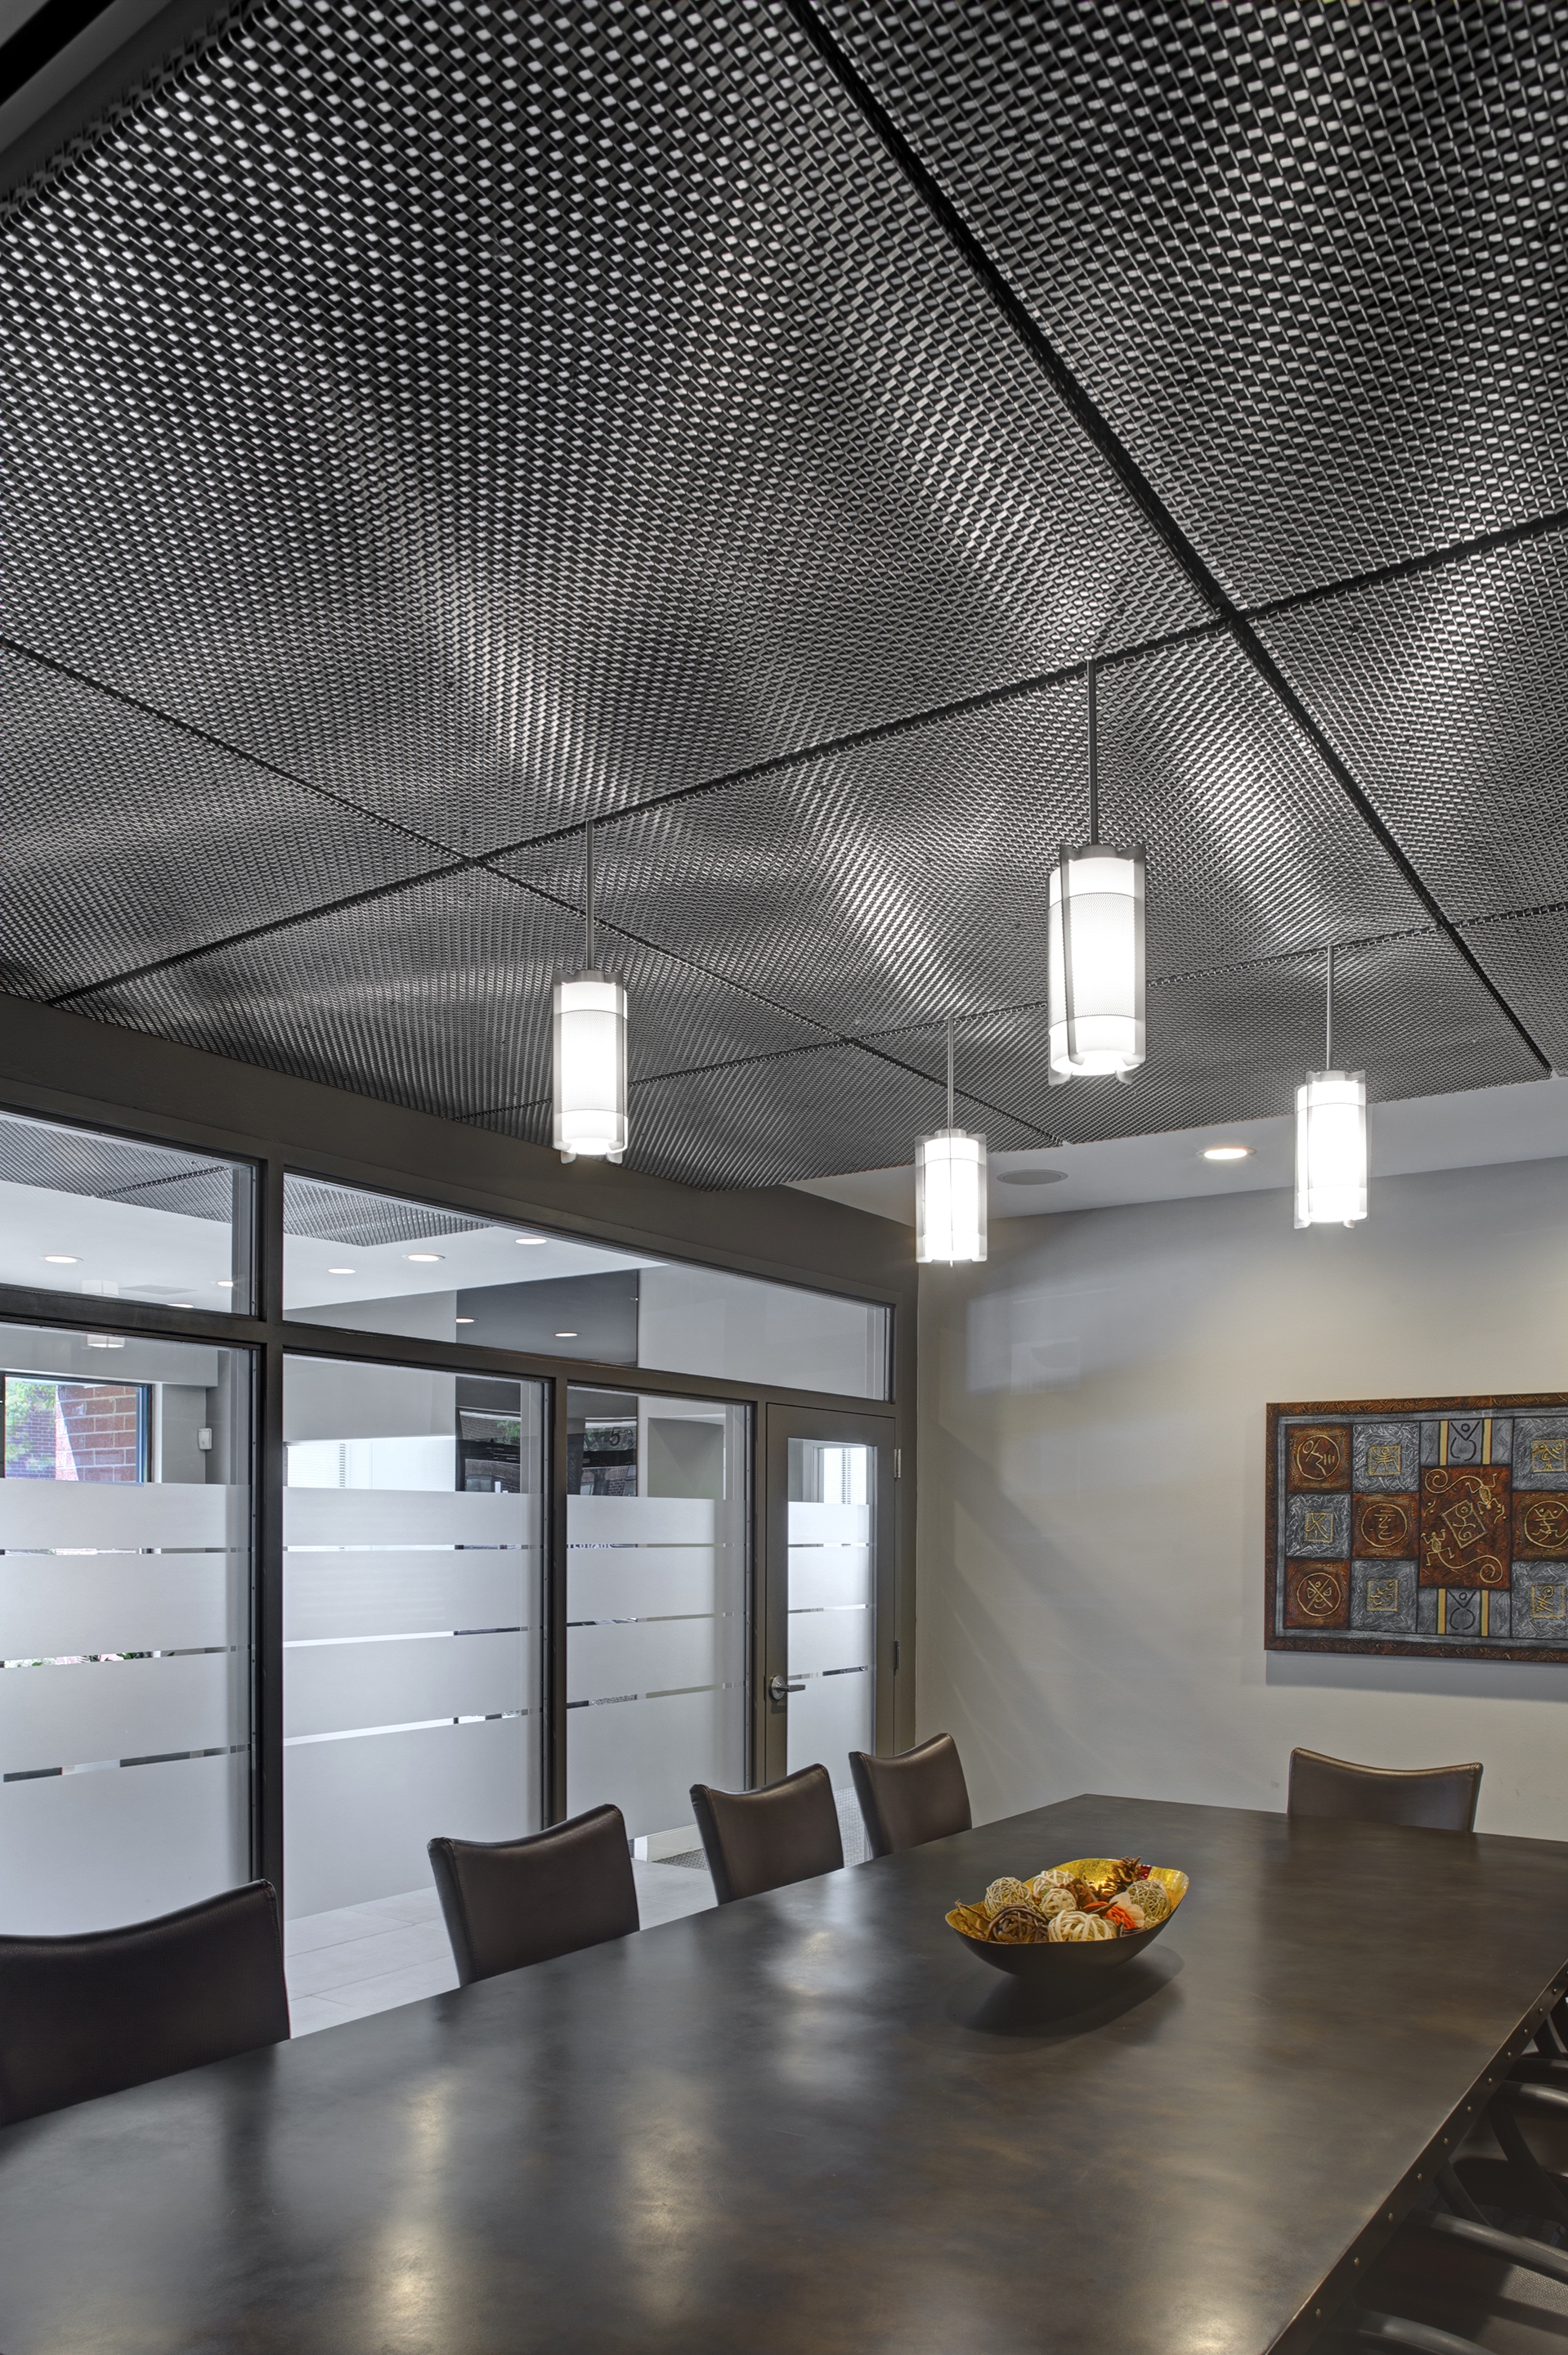 Stainless Steel Ceiling Tiles Stainless Steel Ceiling Tiles 2x2 stainless steel ceiling tile ceiling tiles 1918 X 2880